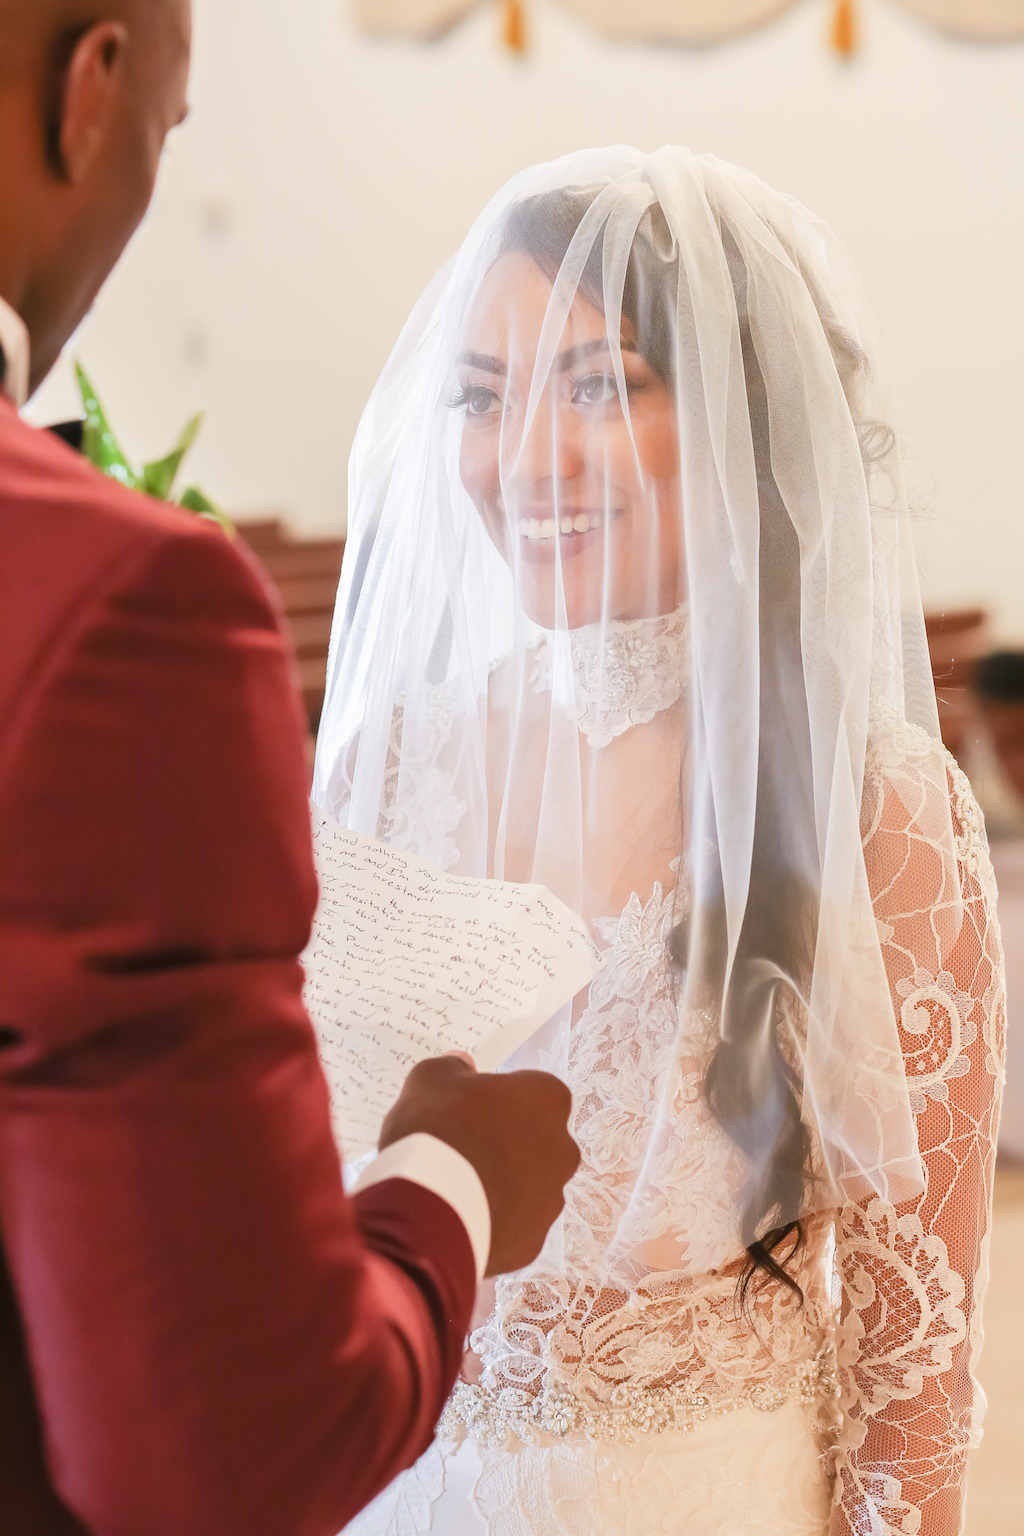 Bride and Groom Ceremony Wedding Portrait, Bride with Veil Over Face | St. Petersburg Photographer Lifelong Photography Studios